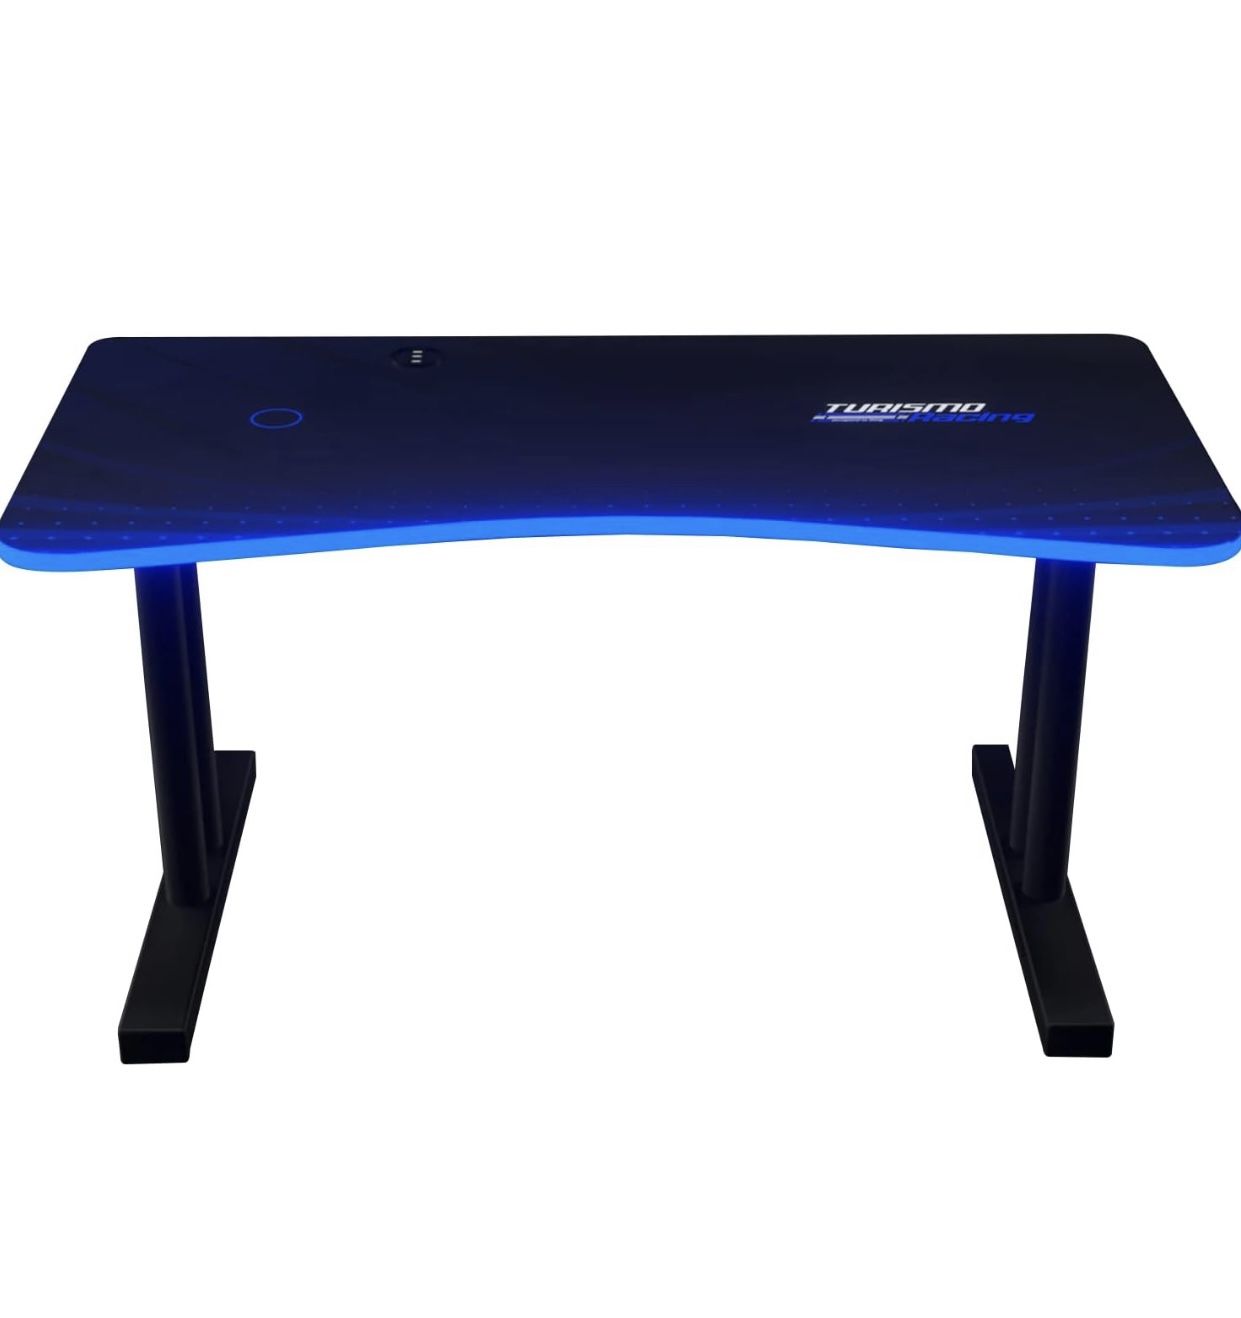 New in box Turismo Racing Gaming Desk - Autodromo Extra-Wide Desk with LED Lighting 34"D x 64"W x30H